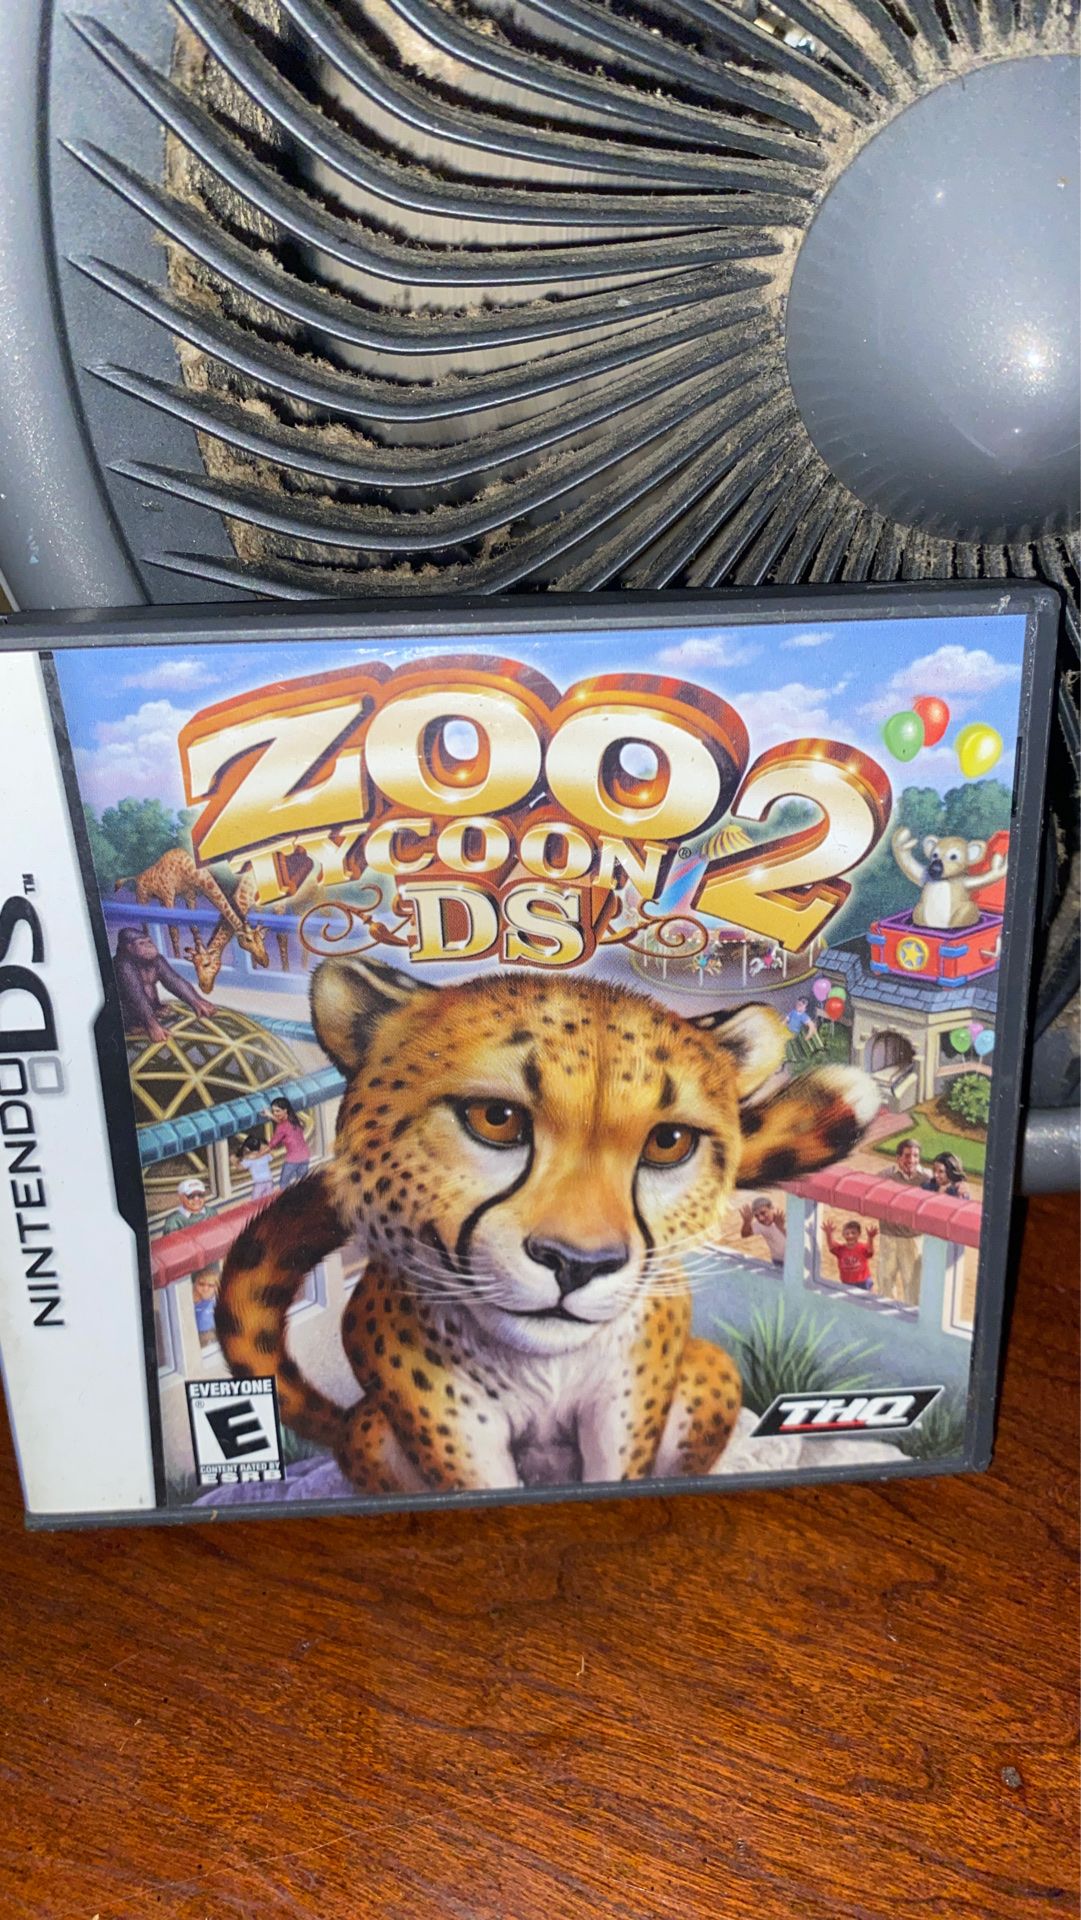 Zoo tycoons ds 2